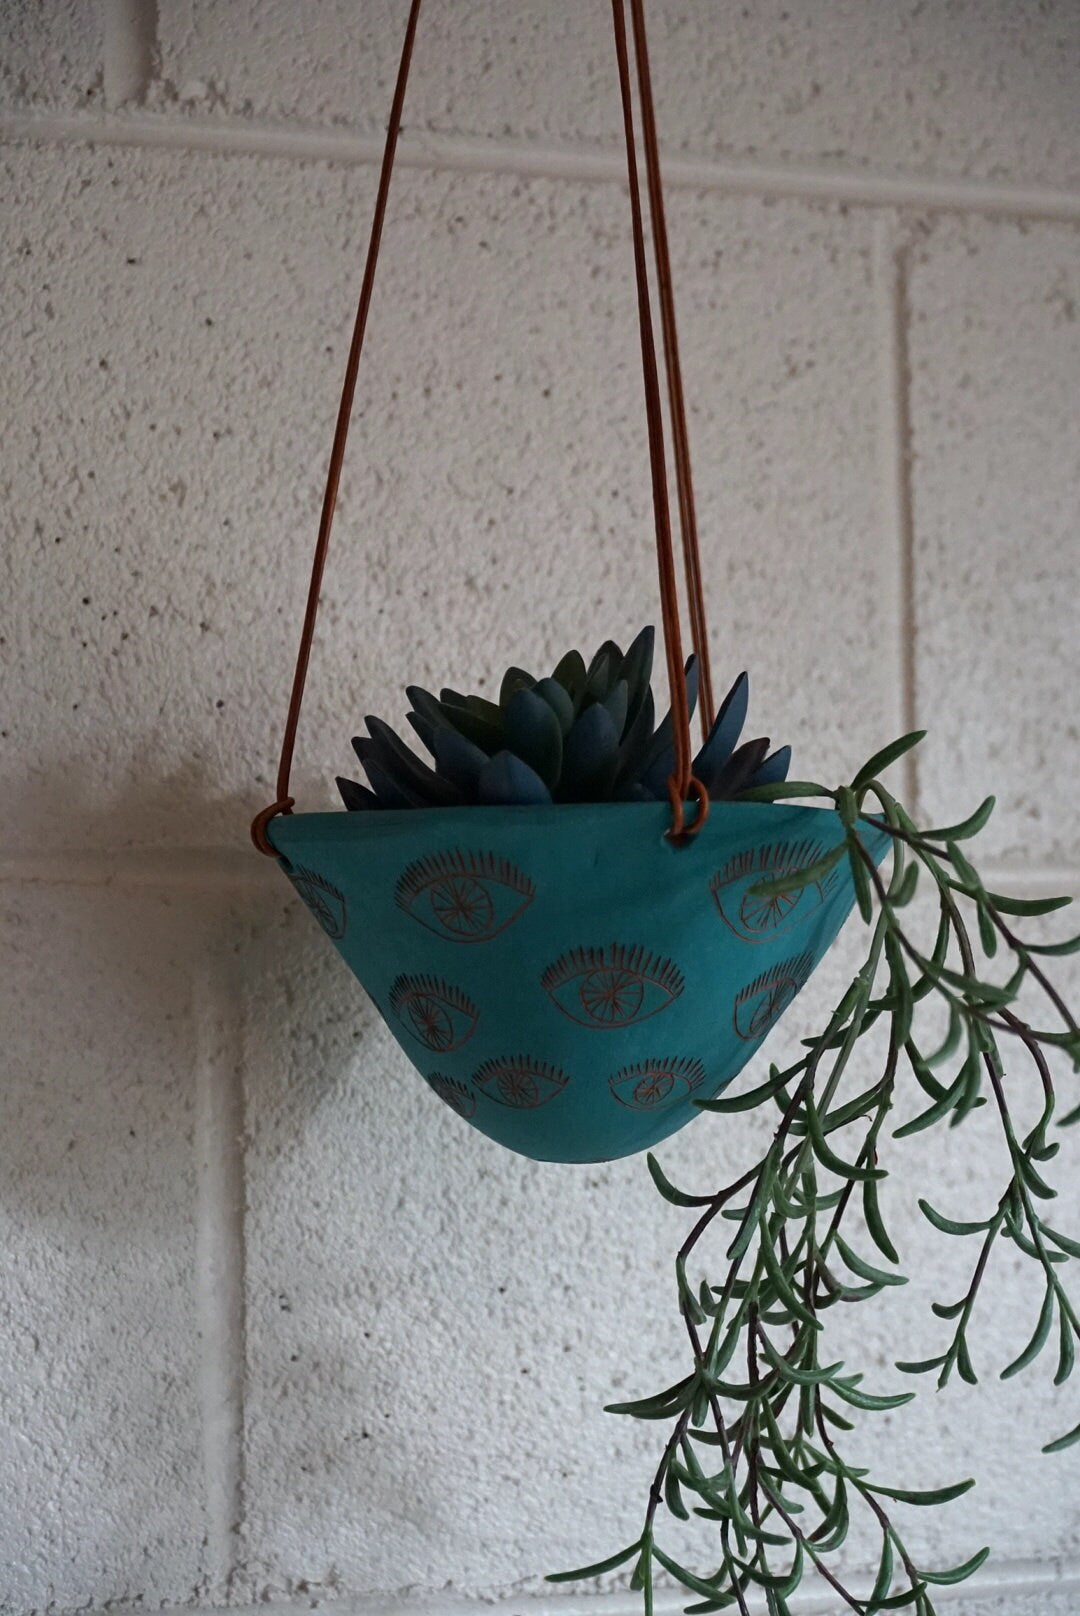 Teal & Terracotta Hanging Planter w/ "Eye" Design - Hanging Pot with Carved Design - Succulent, Cactus, Herb, Air Plant, Etc